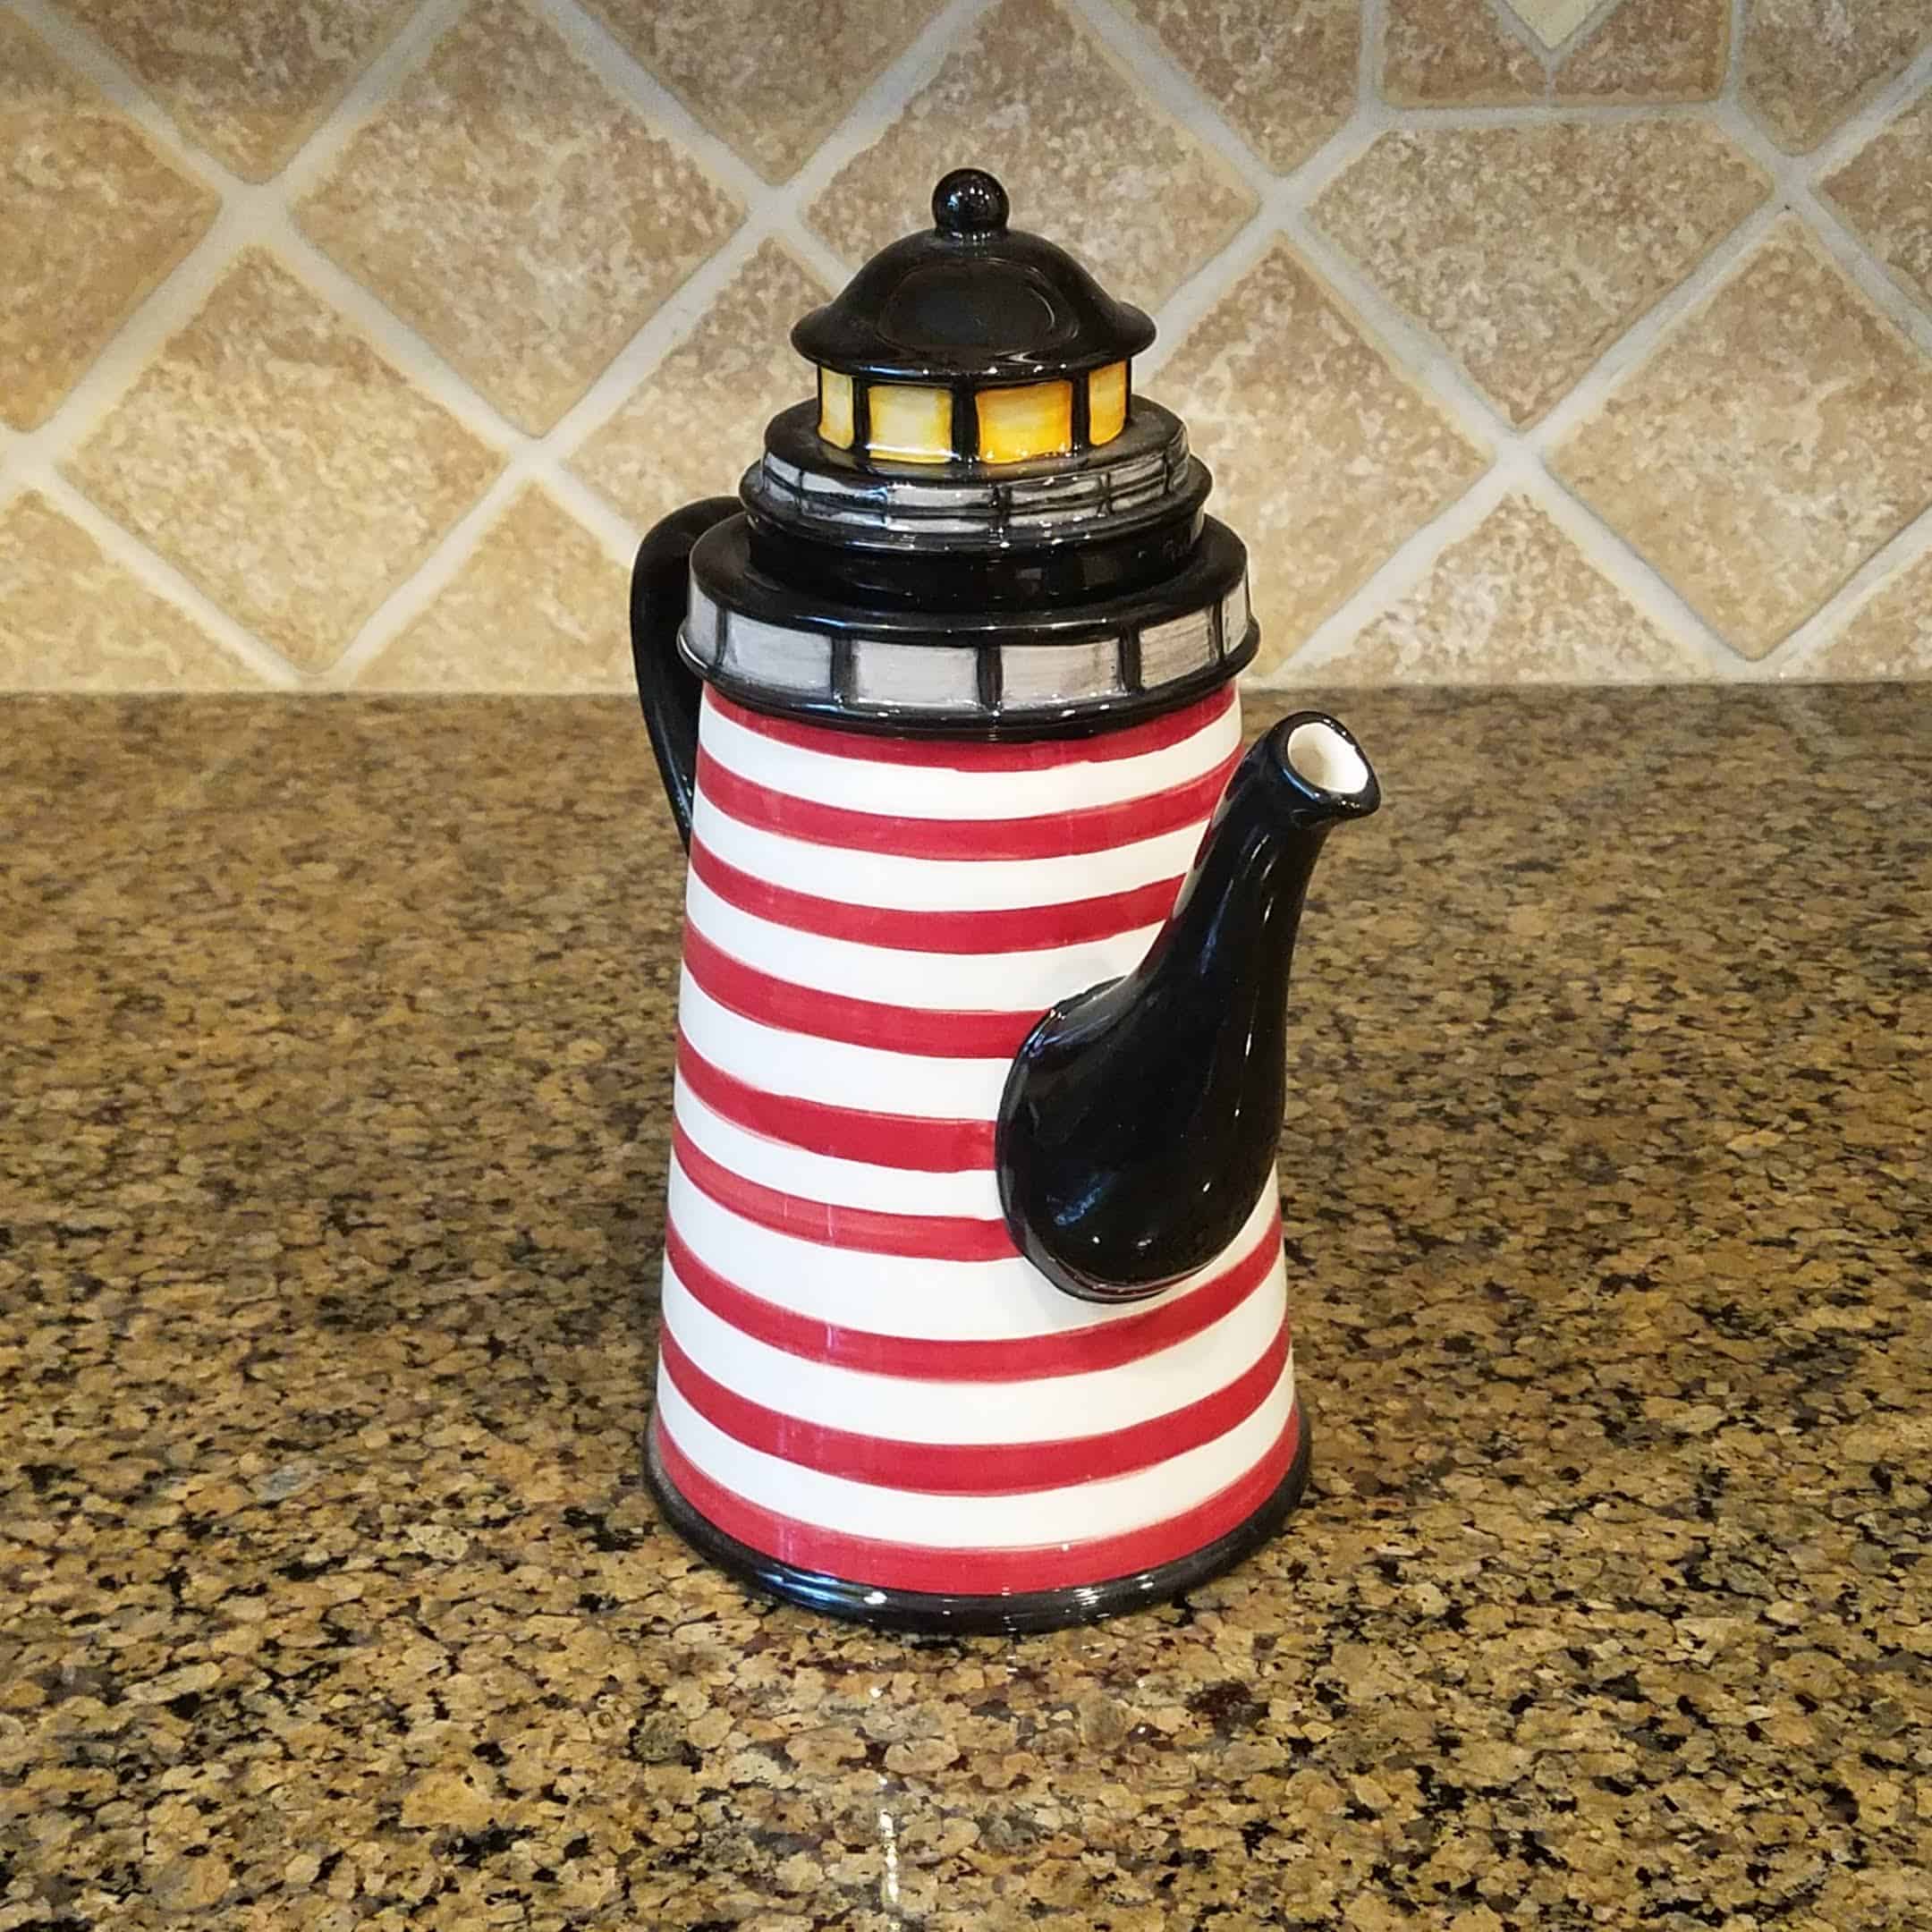 This Beacon Lighthouse Teapot is made with love by Premier Homegoods! Shop more unique gift ideas today with Spots Initiatives, the best way to support creators.